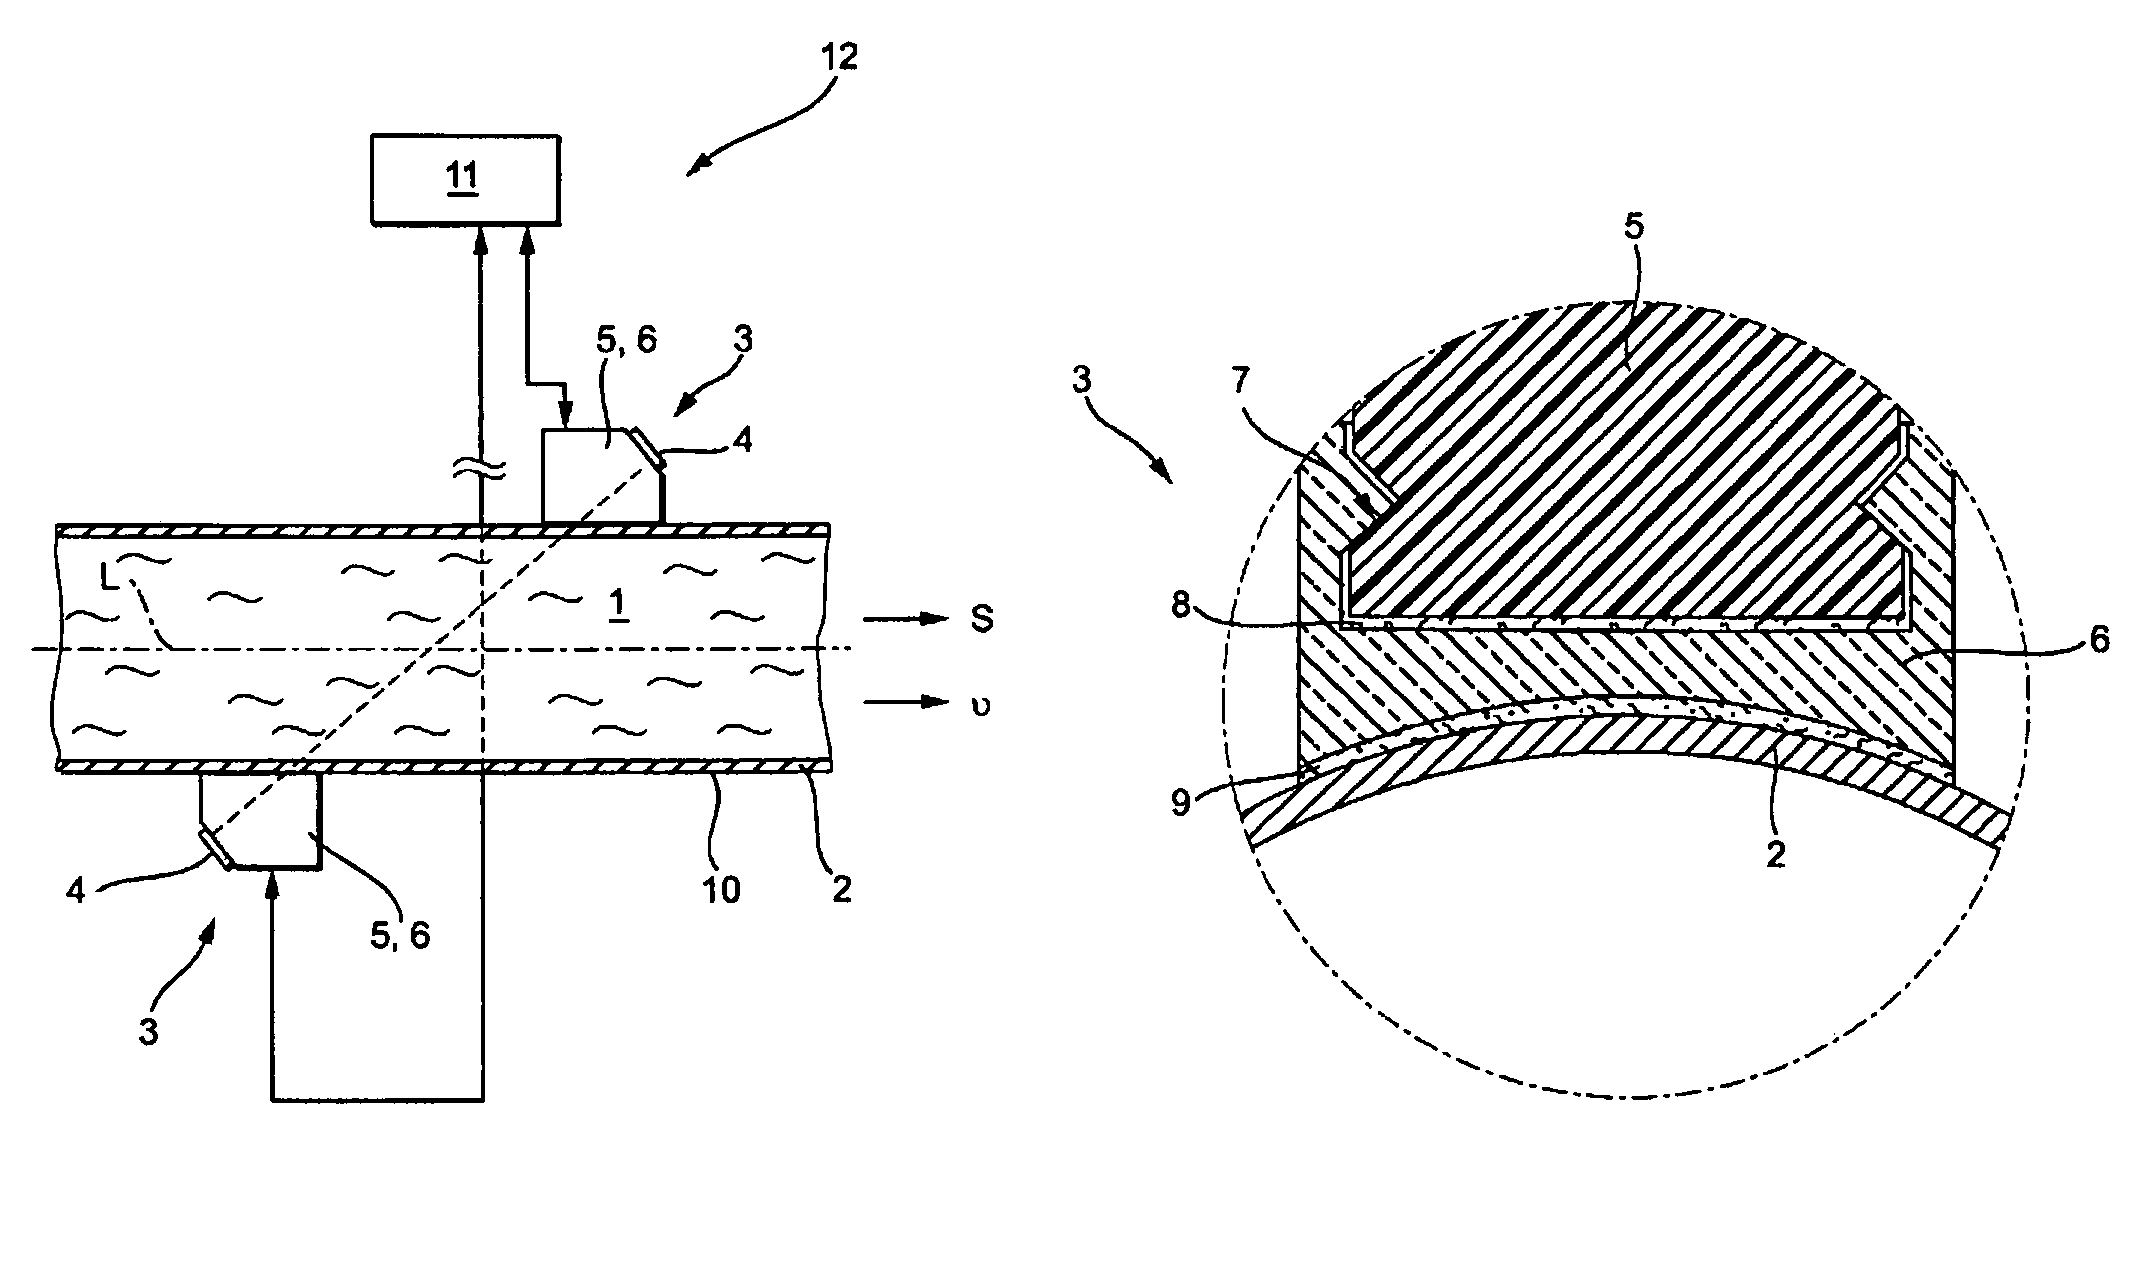 Flow monitoring apparatus having an ultrasonic sensor with a coupling adapter having securing mechanism